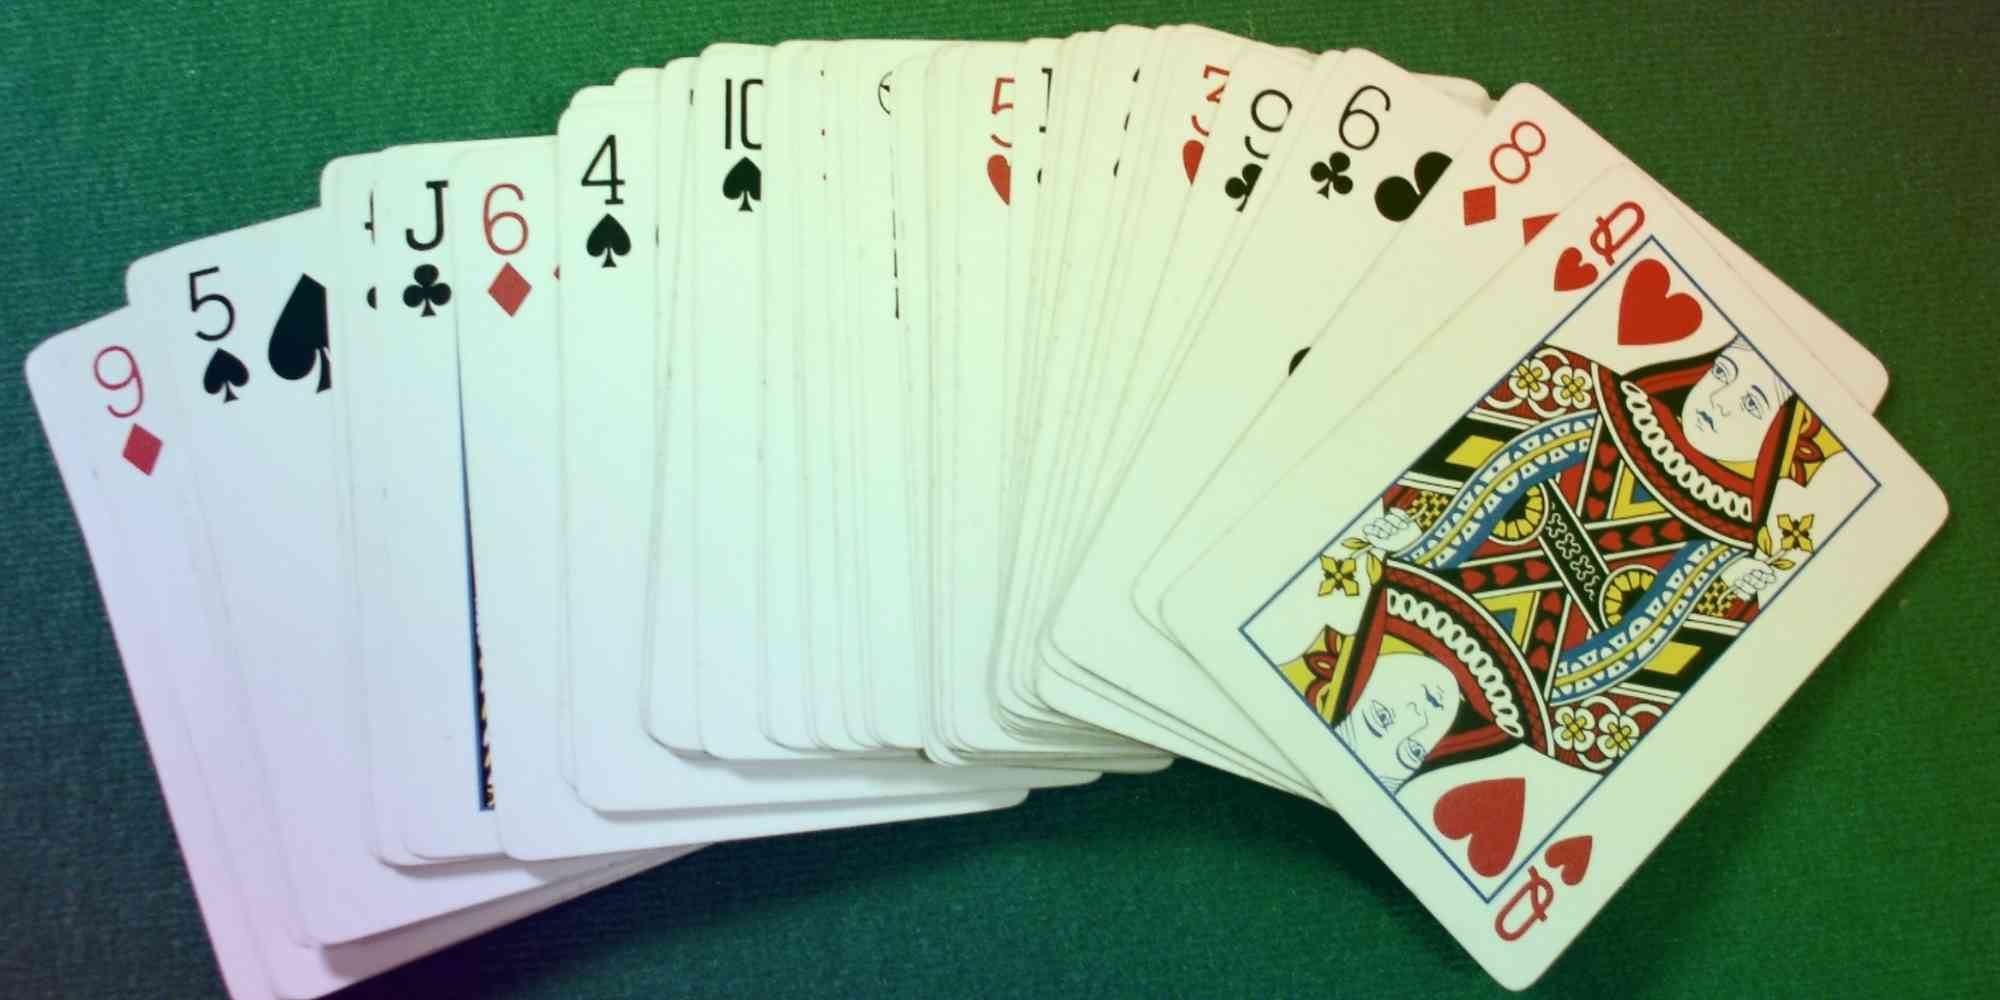 How Many 5s in a Deck of Cards